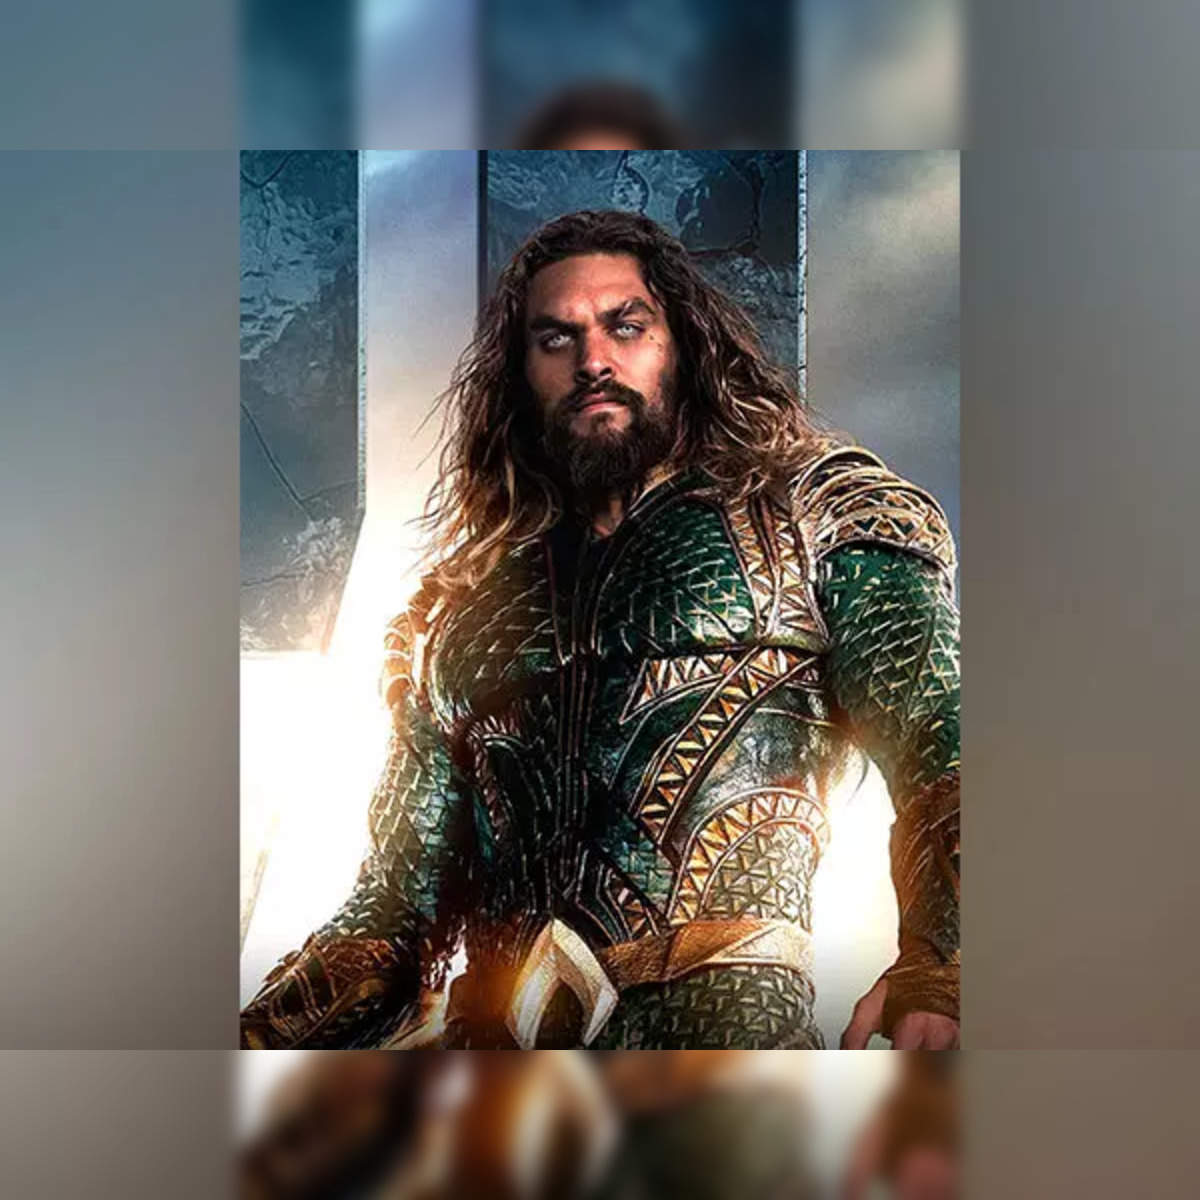 Aquaman 2: Aquaman 2 release date, trailer: What to expect from Jason  Momoa, Amber Heard-starrer 'Aquaman and the Lost Kingdom'? - The Economic  Times